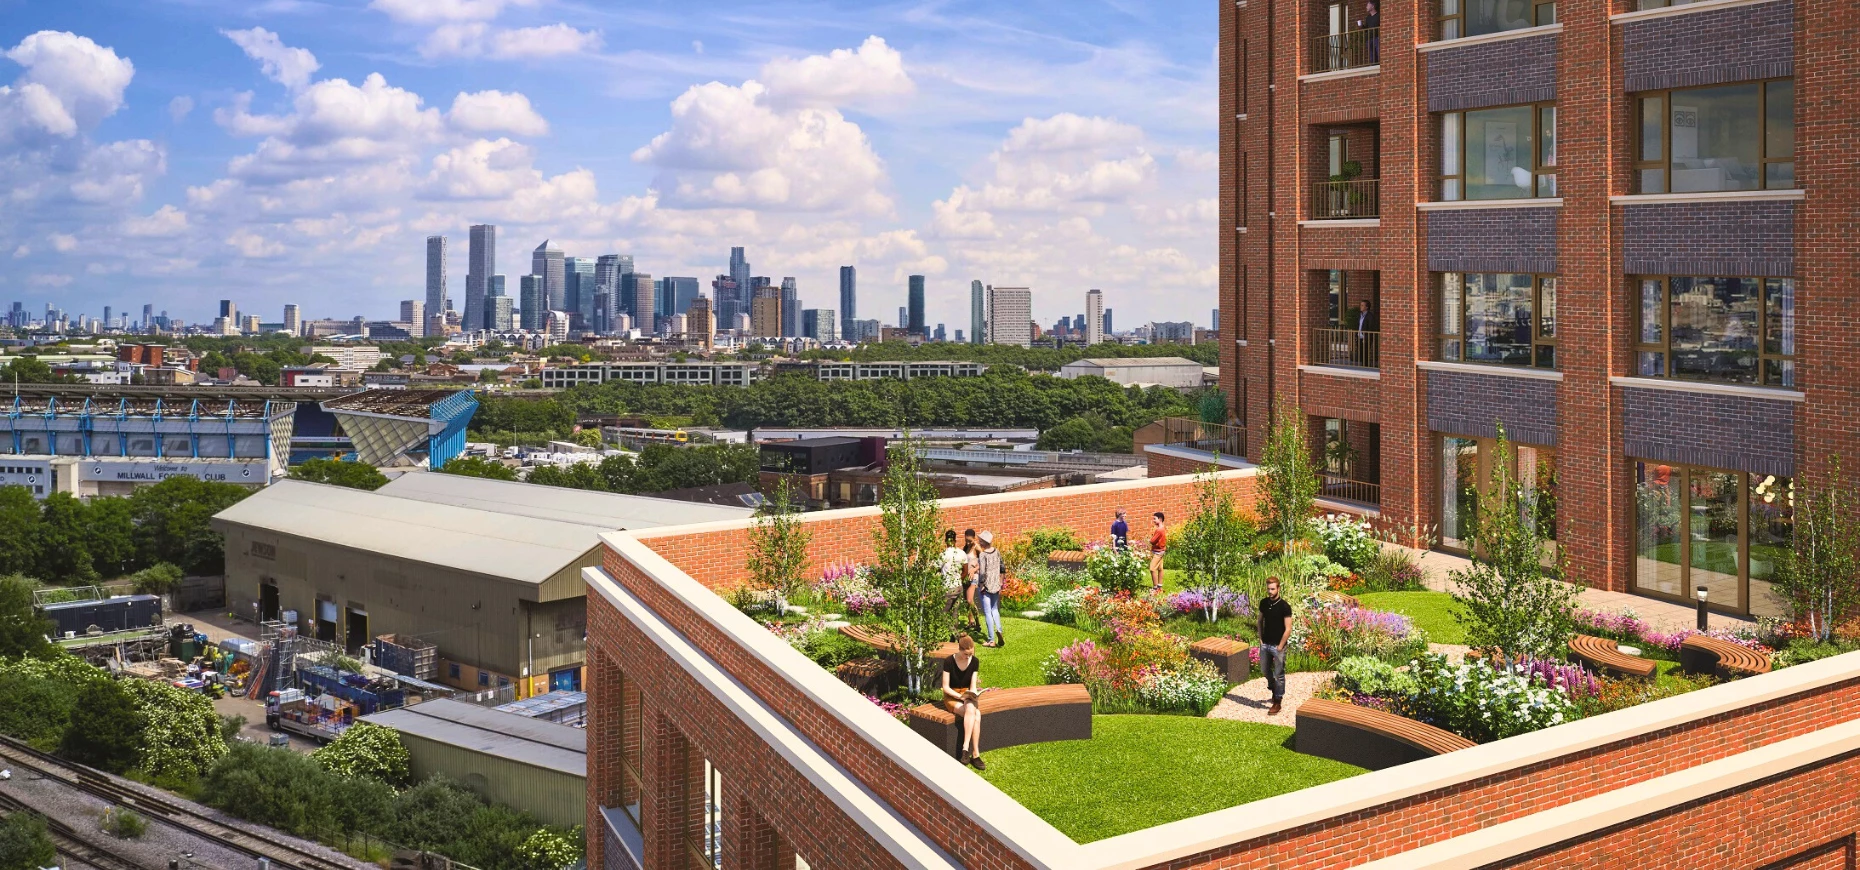 An exterior shot of the residents’ roof terrace and communal podium gardens at Bermondsey Heights.